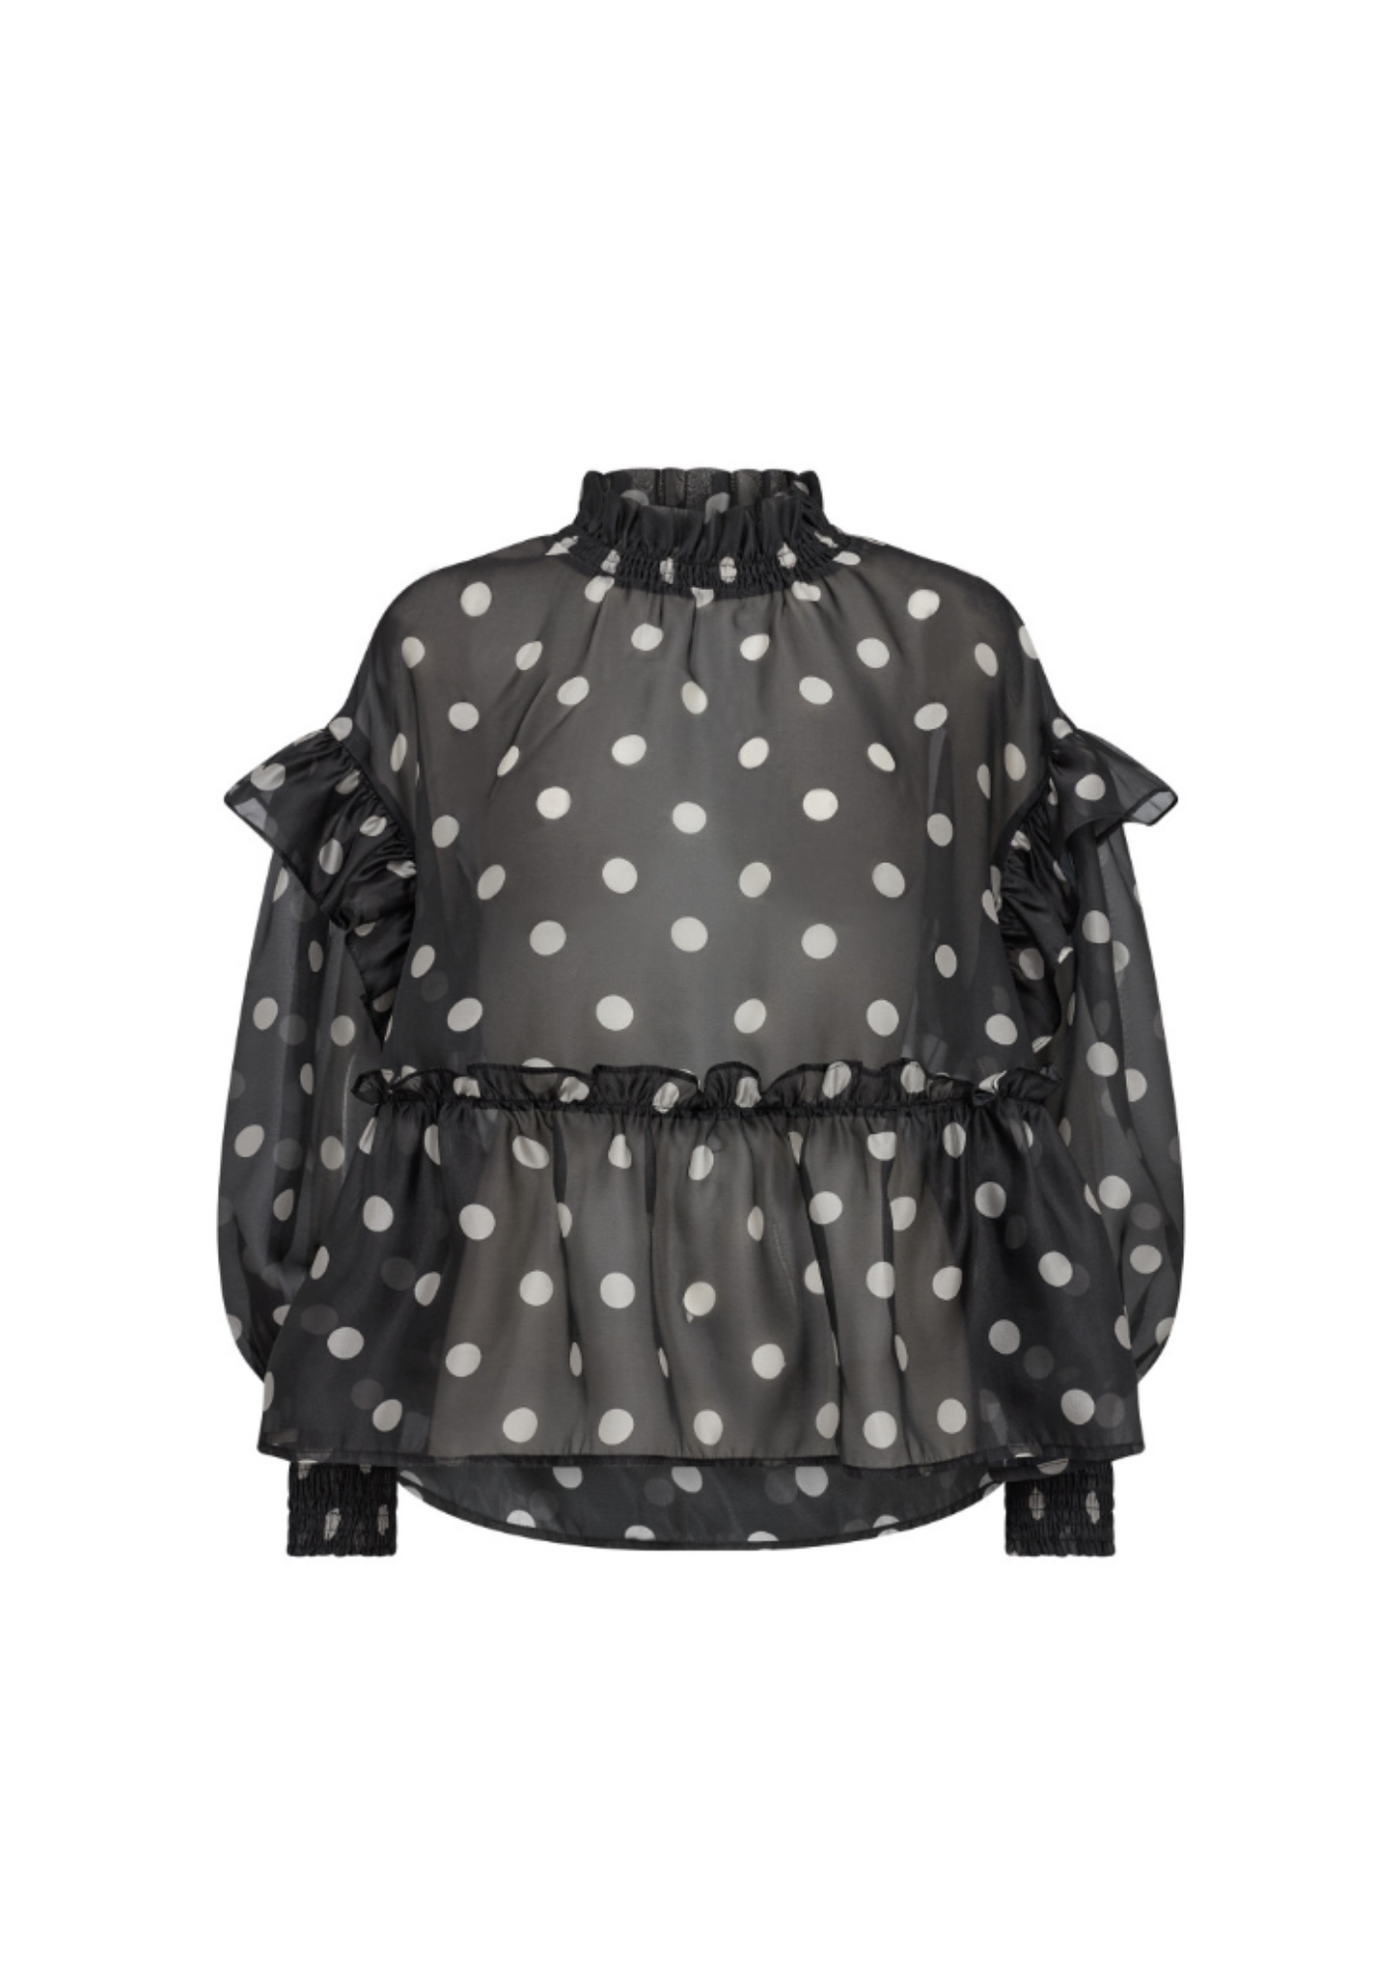 Co' Couture | DrewCC Dot Frill Blouse Black Offwhite